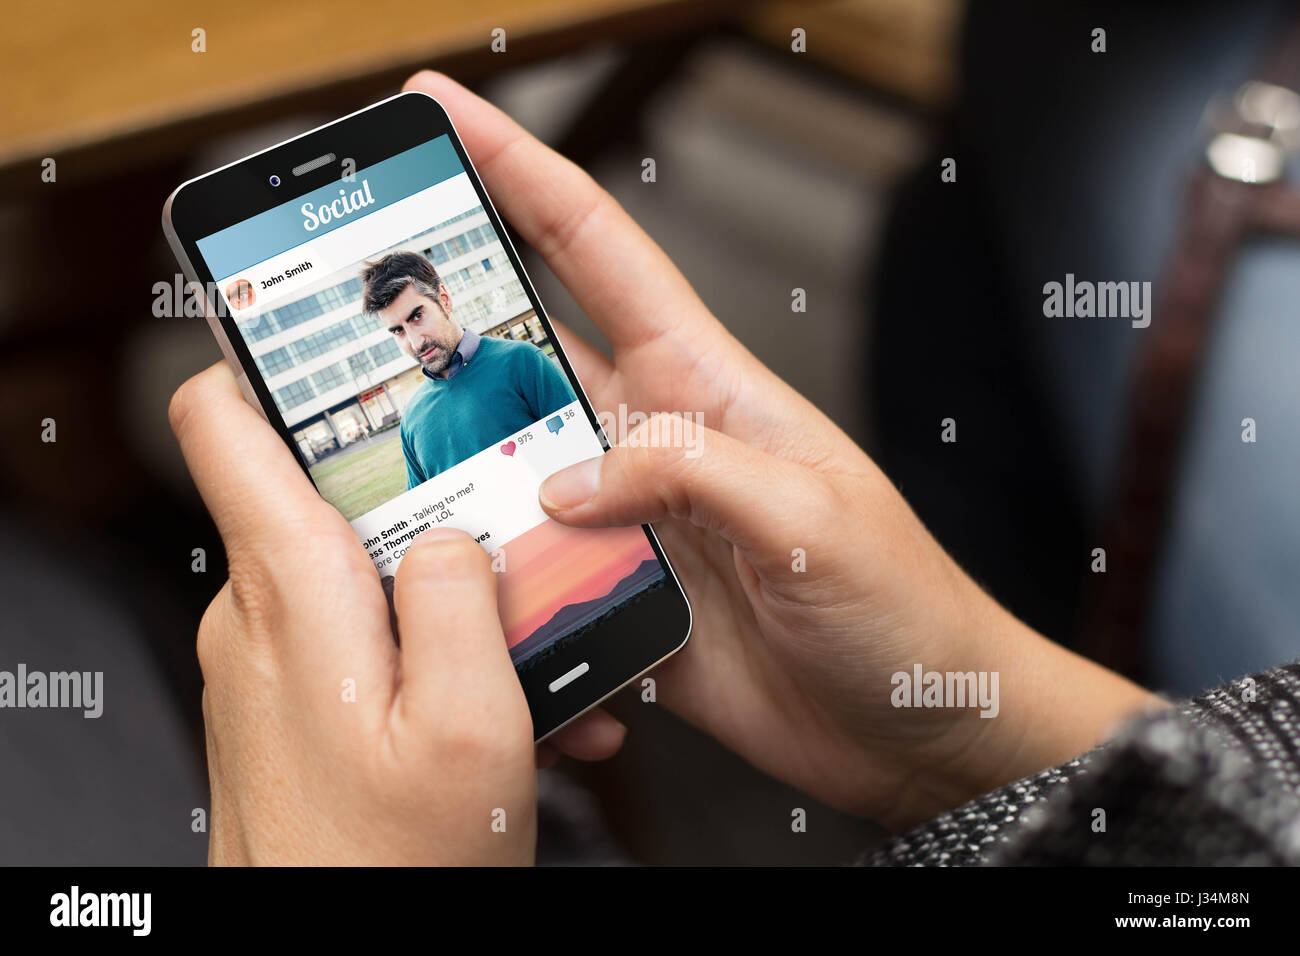 mobile design concept: girl using a digital generated phone with social photo network on the screen. All screen graphics are made up. Stock Photo